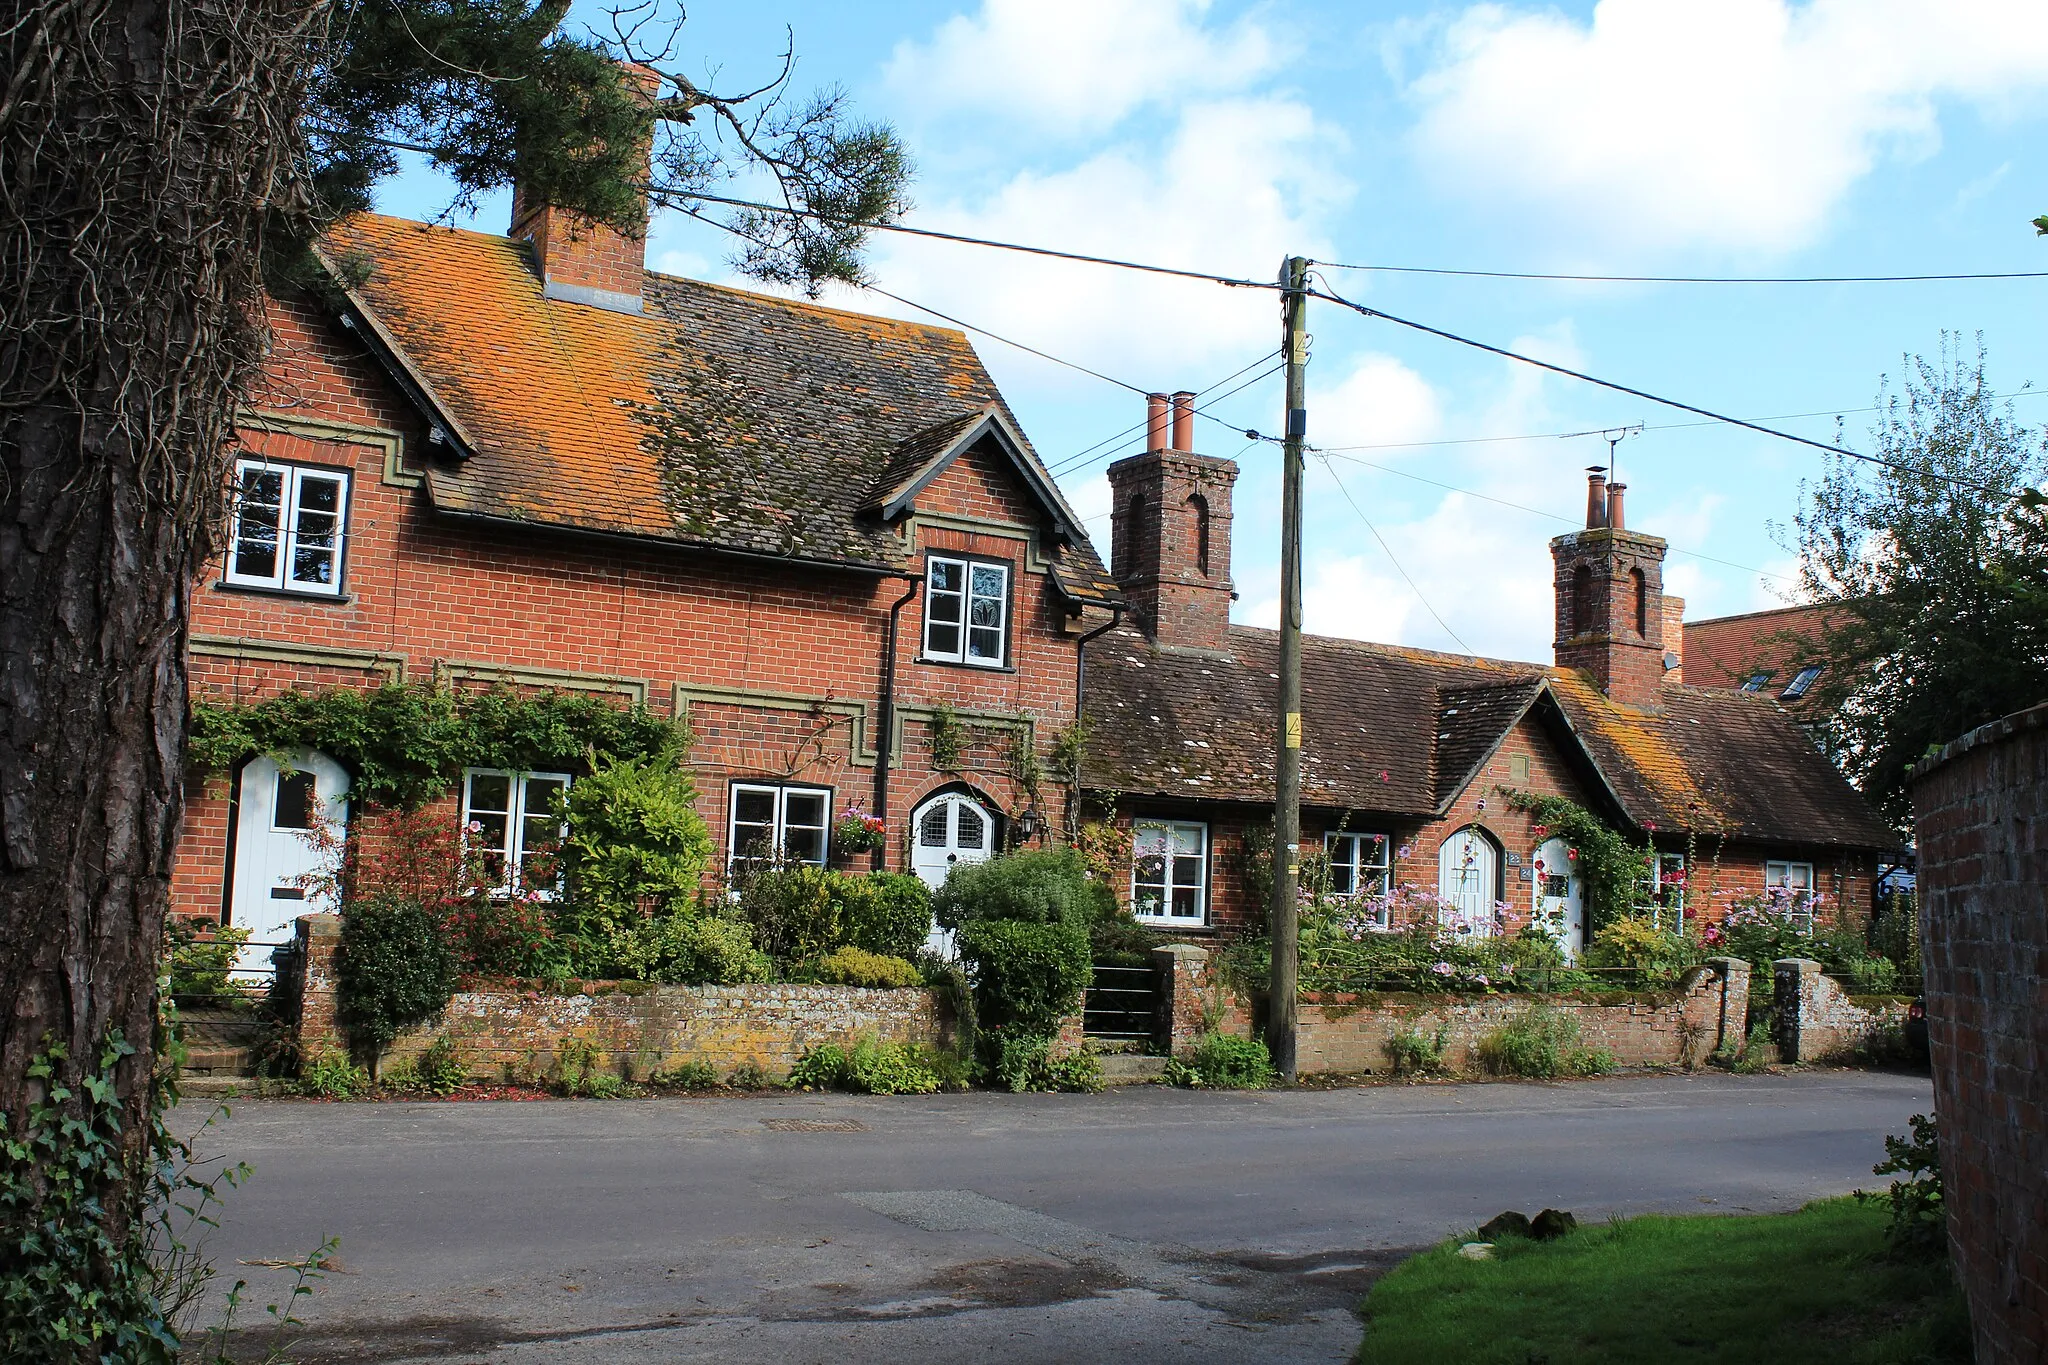 Photo showing: The village of Sutton Waldron in Dorset, England, on 1 September 2015